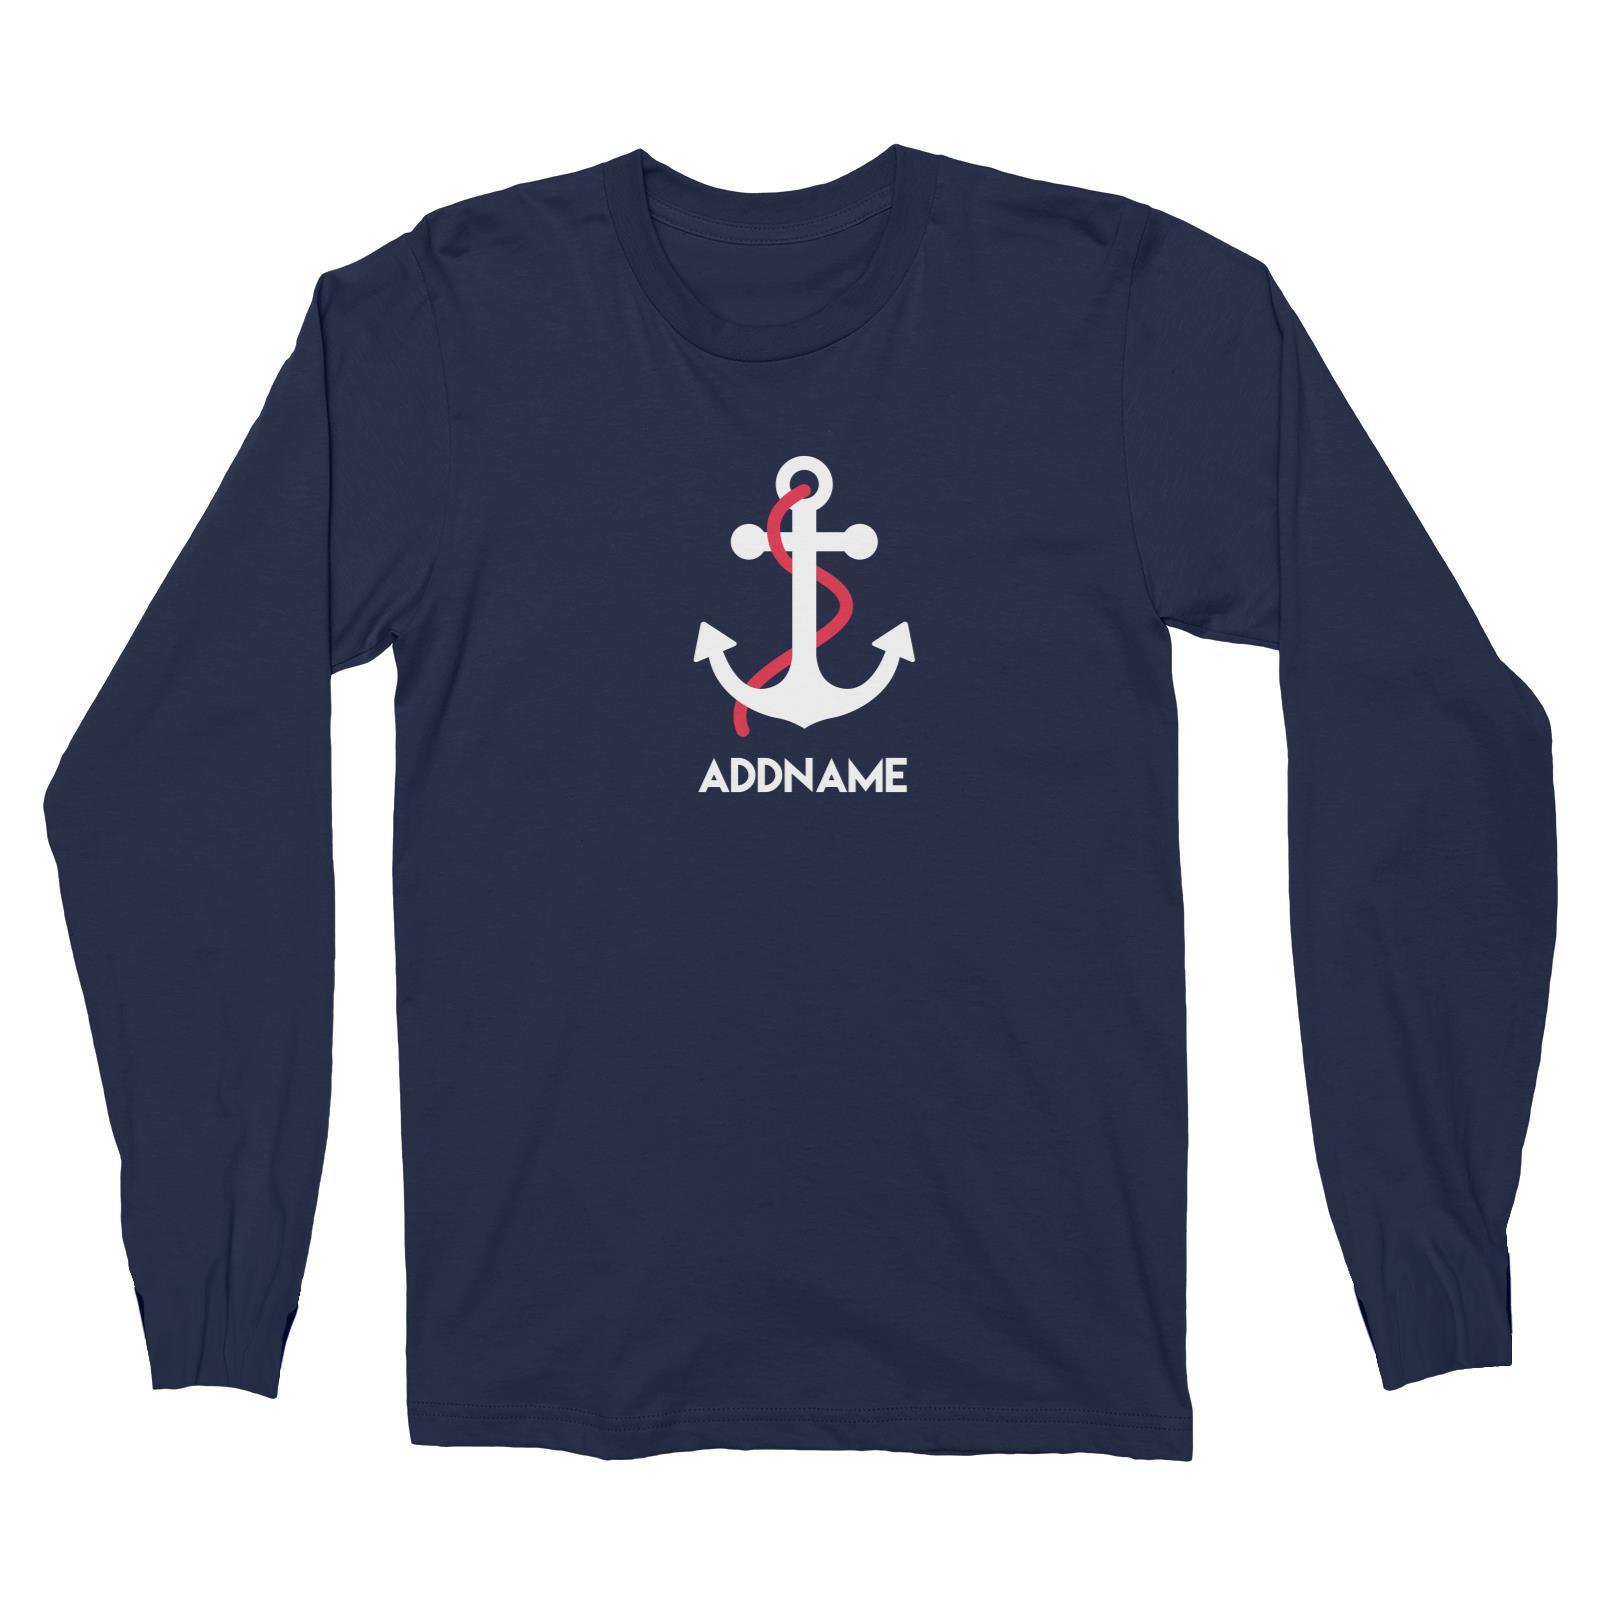 Sailor Anchor Red Addname Long Sleeve Unisex T-Shirt  Matching Family Personalizable Designs